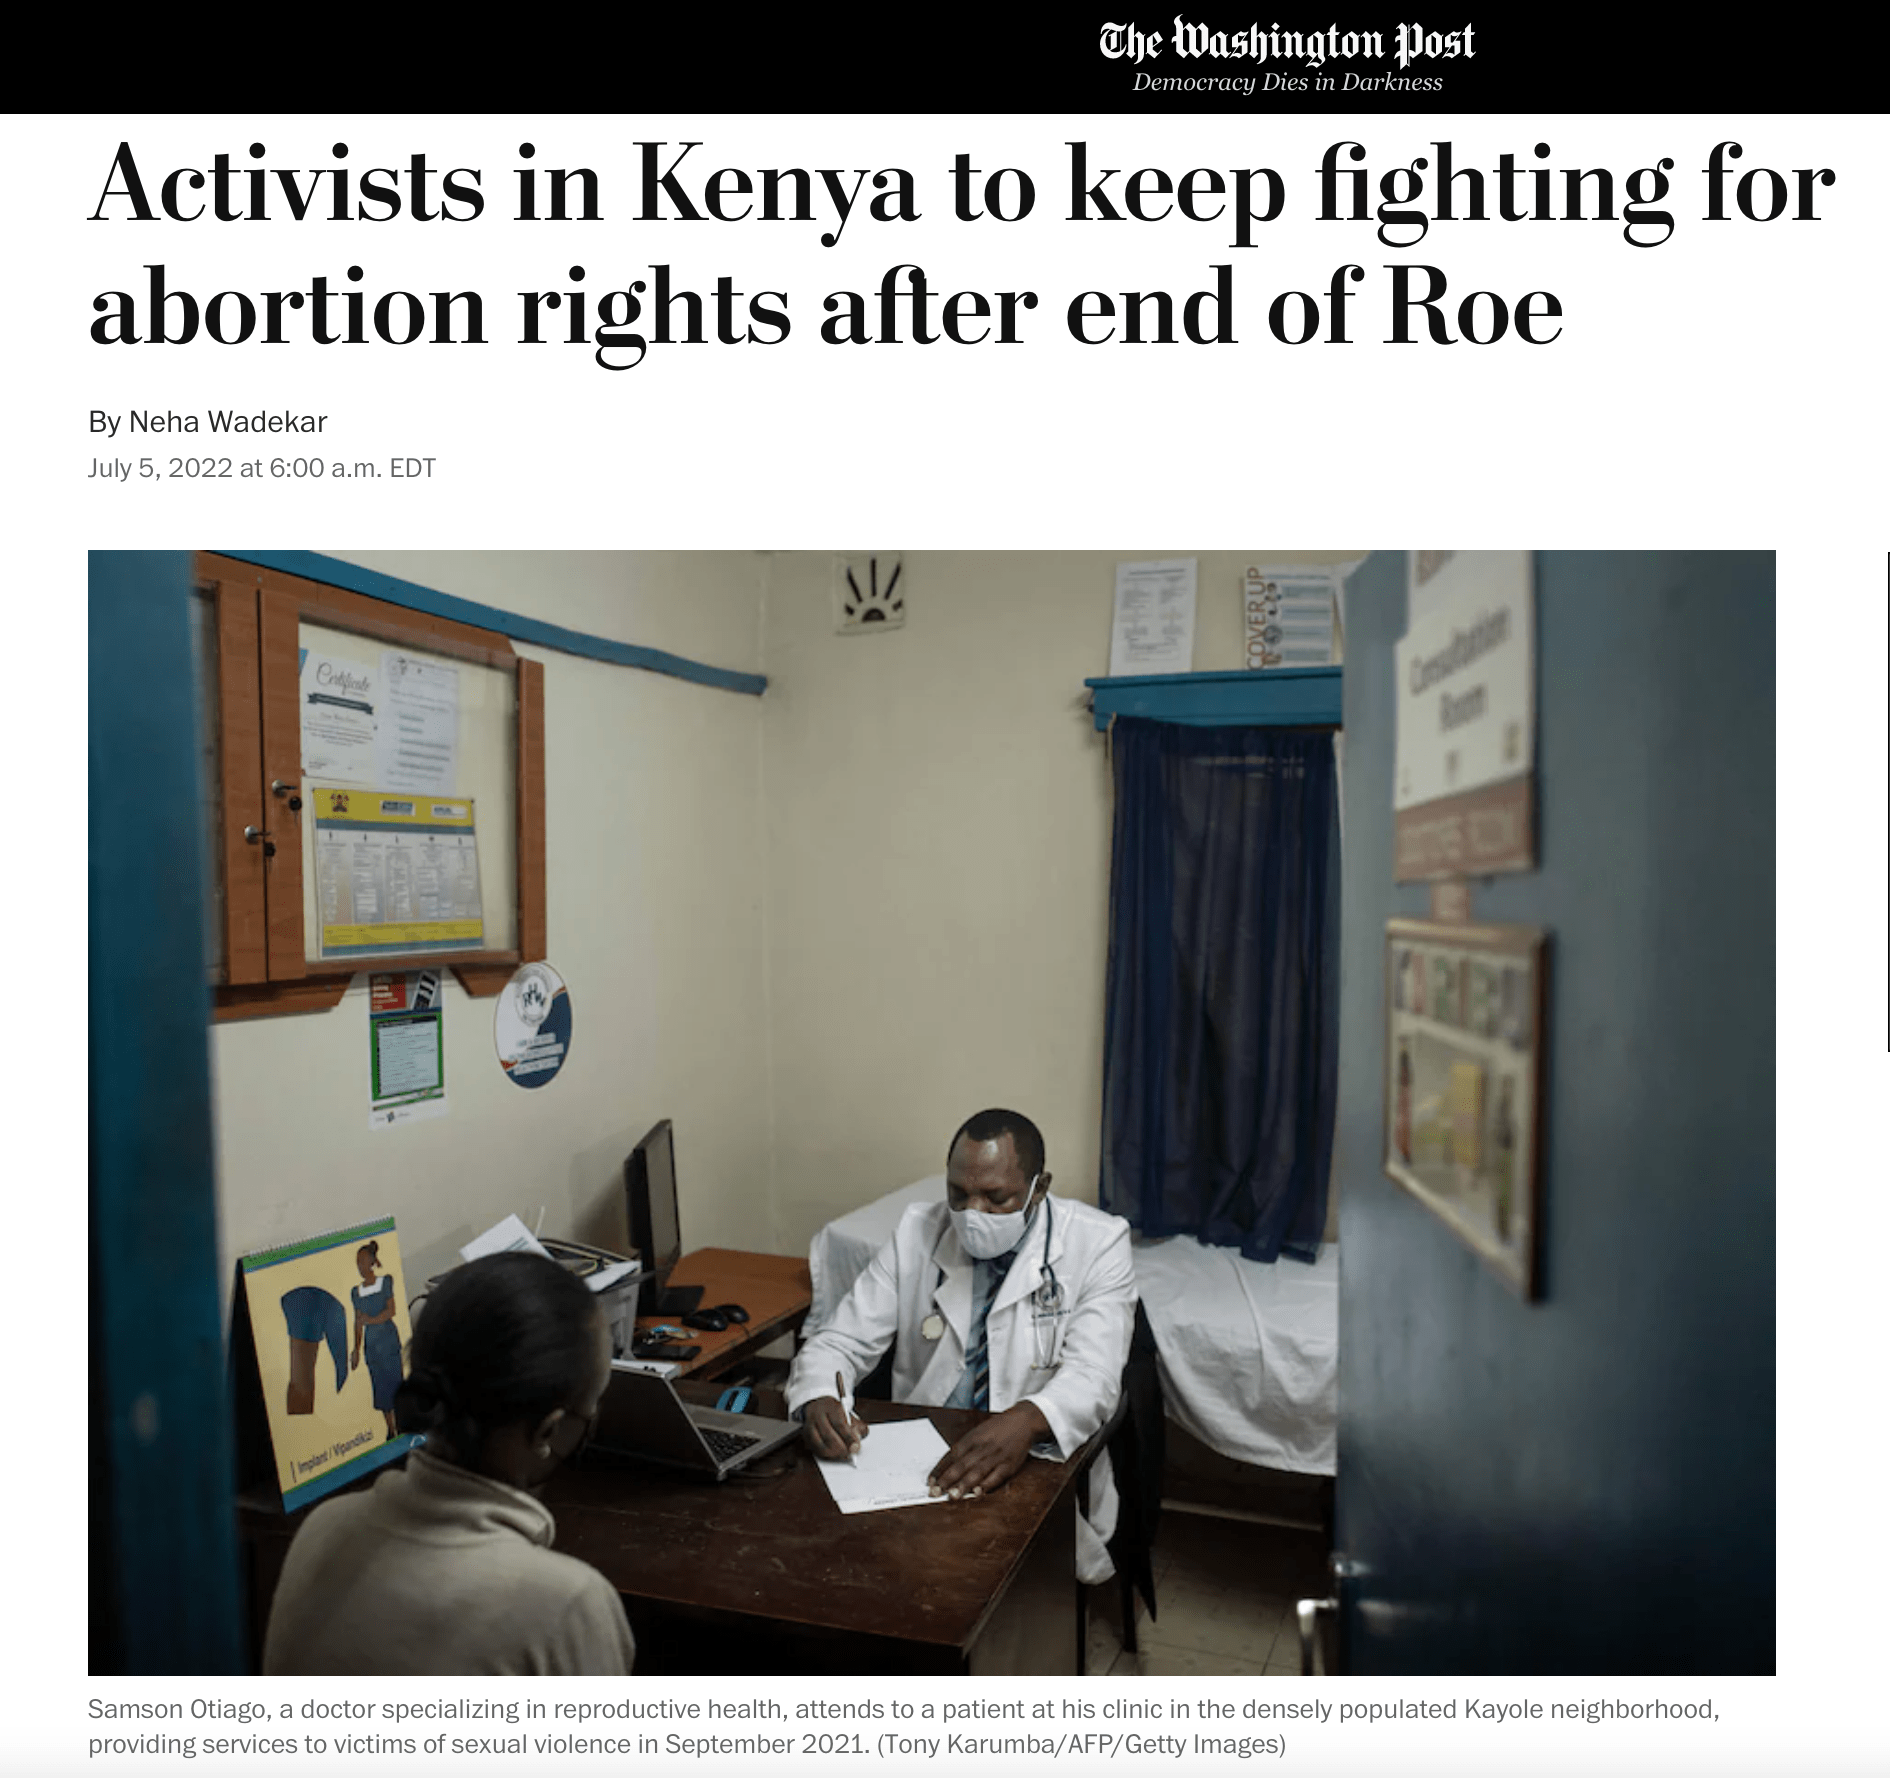 Activists in Kenya to keep fighting for abortion rights after end of Roe – The Washington Post (image)